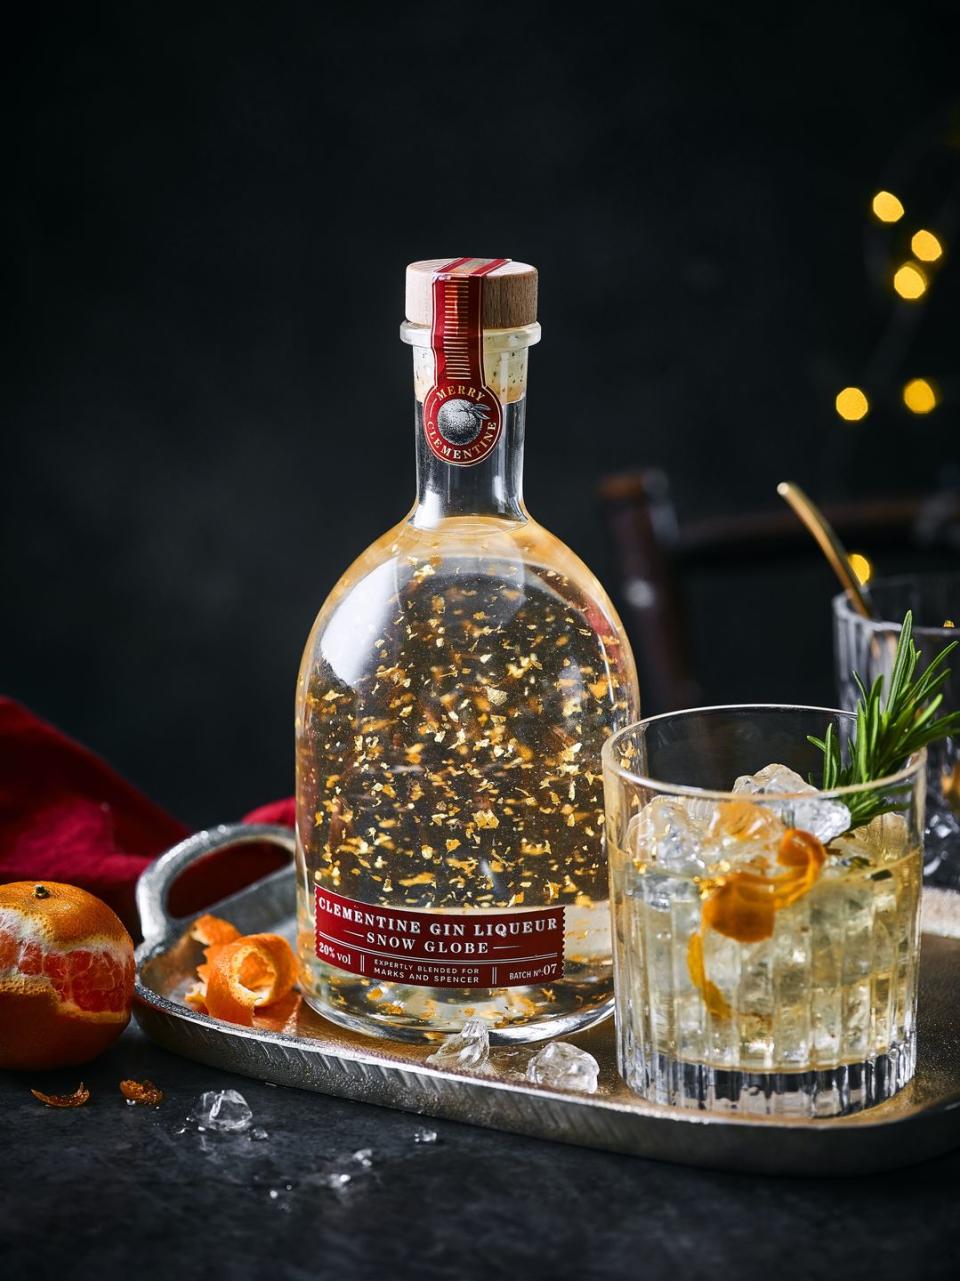 <p><strong>M&S says:</strong> 'This is going to be THE gift of the season, a festive clementine flavoured gin complete with edible 23 carat gold leaf pieces, which when the bottle is turned, magically float, creating a snow globe effect .'</p>